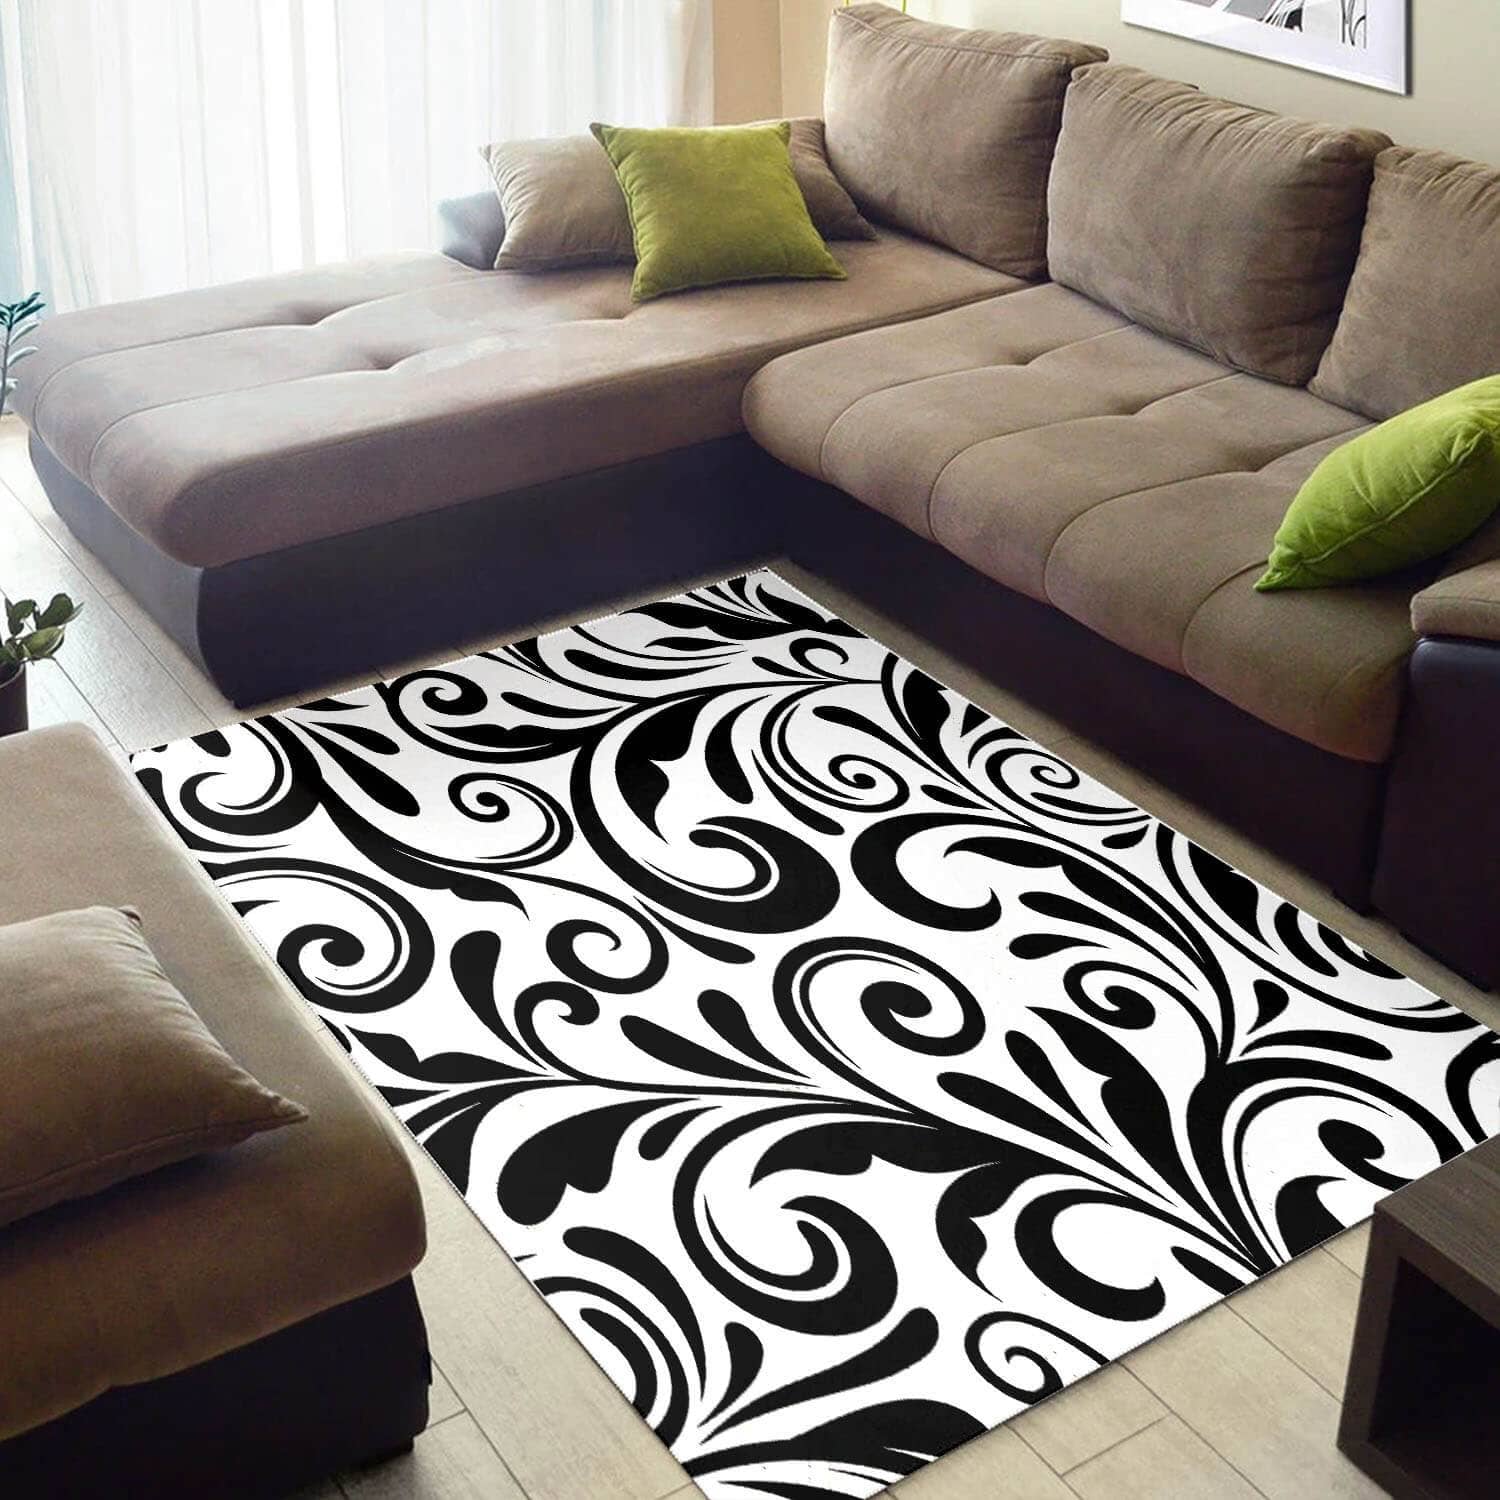 Cool African Attractive Seamless Pattern Themed Carpet Living Room Rug